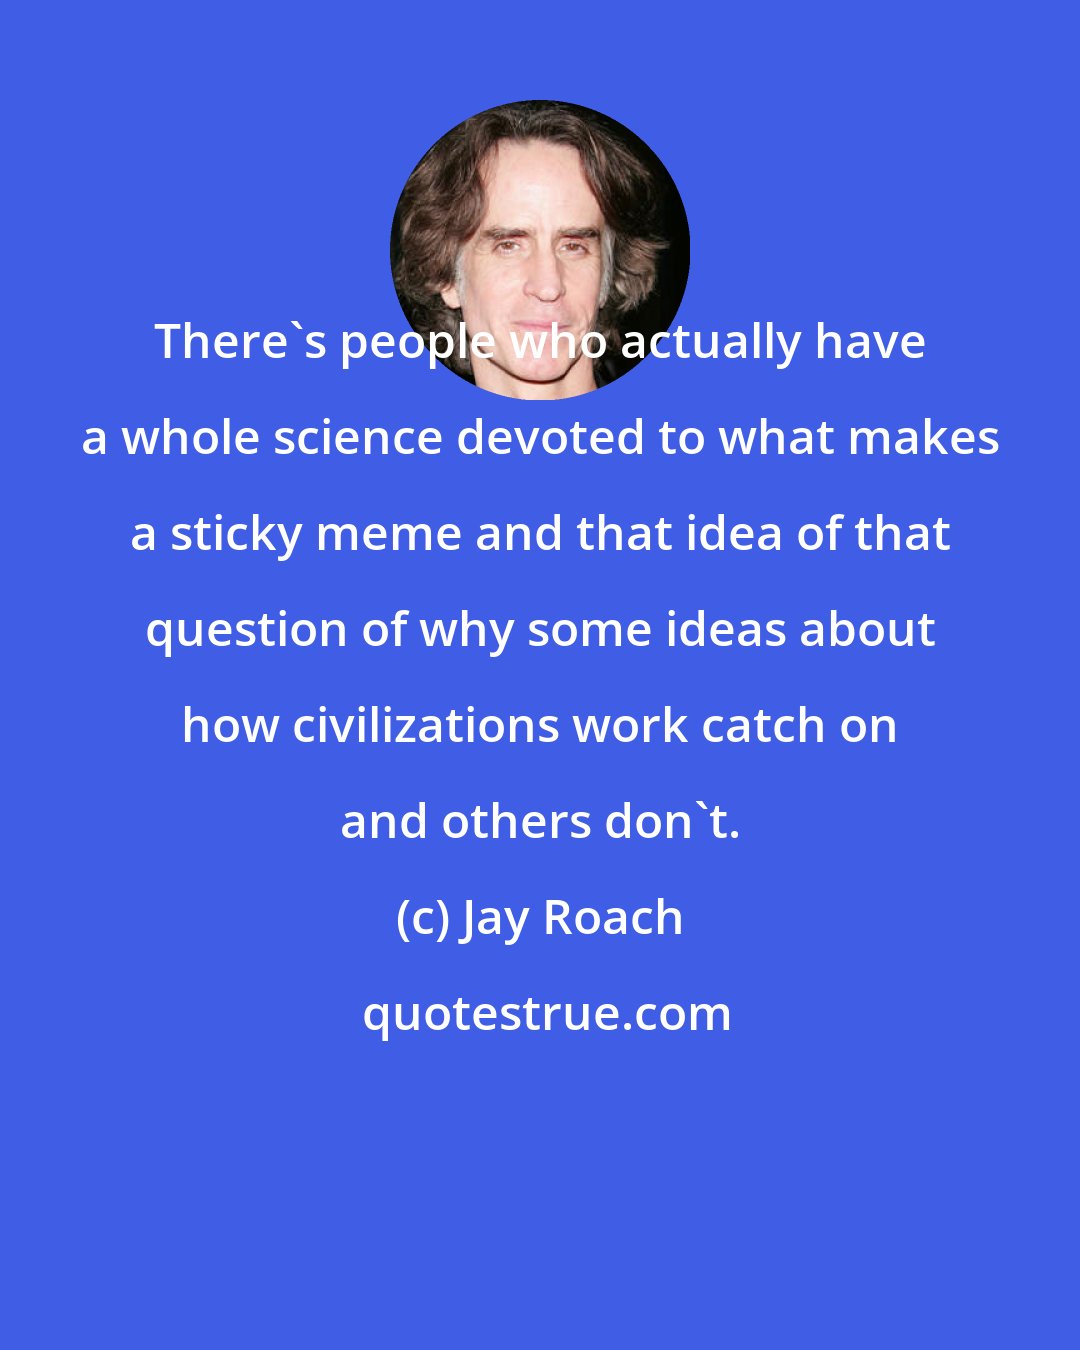 Jay Roach: There's people who actually have a whole science devoted to what makes a sticky meme and that idea of that question of why some ideas about how civilizations work catch on and others don't.